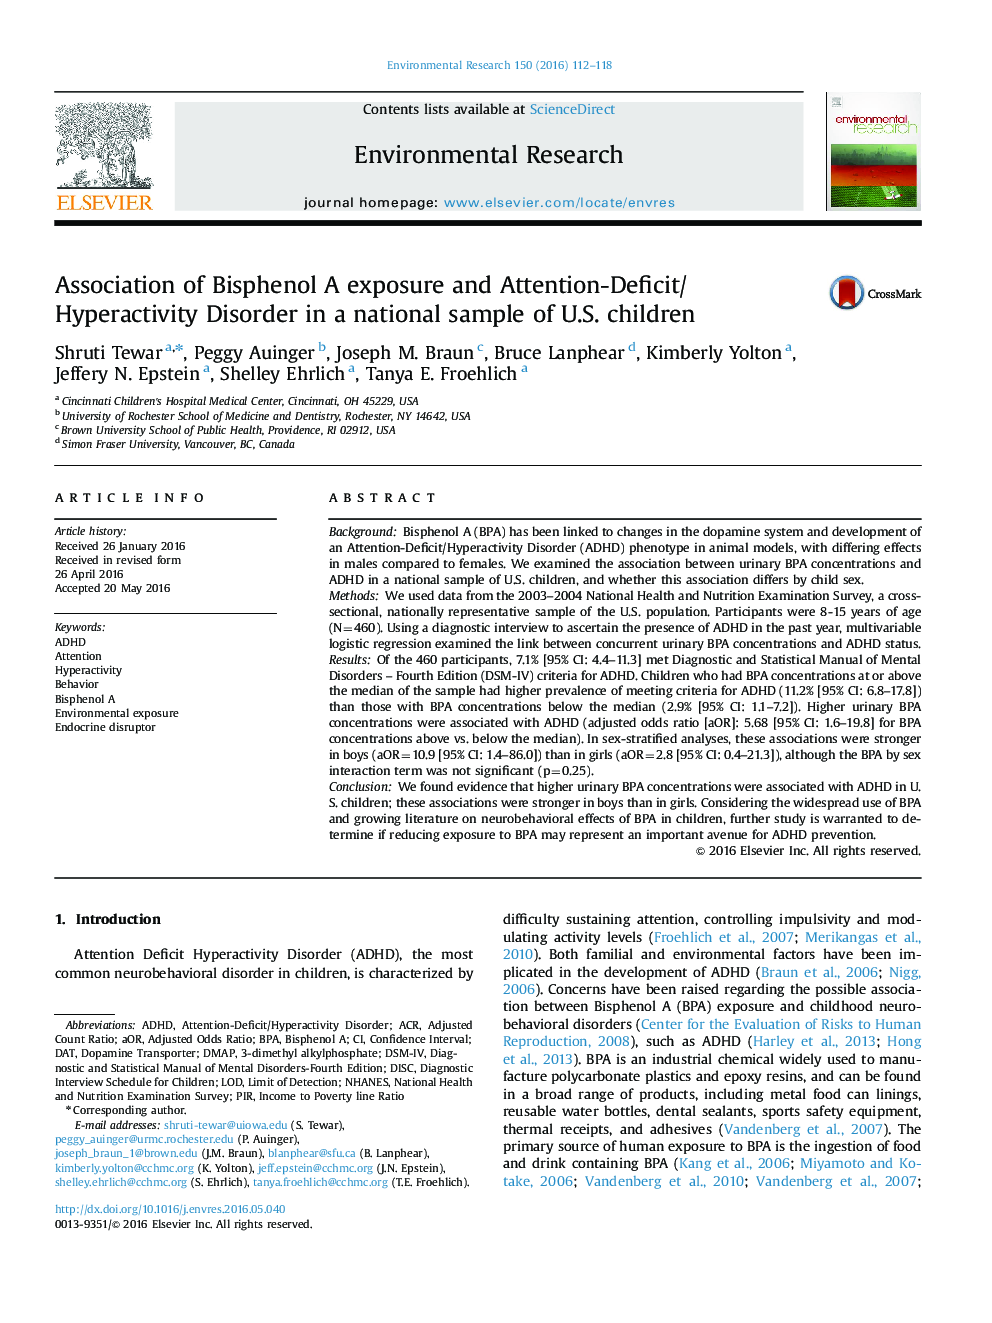 Association of Bisphenol A exposure and Attention-Deficit/Hyperactivity Disorder in a national sample of U.S. children